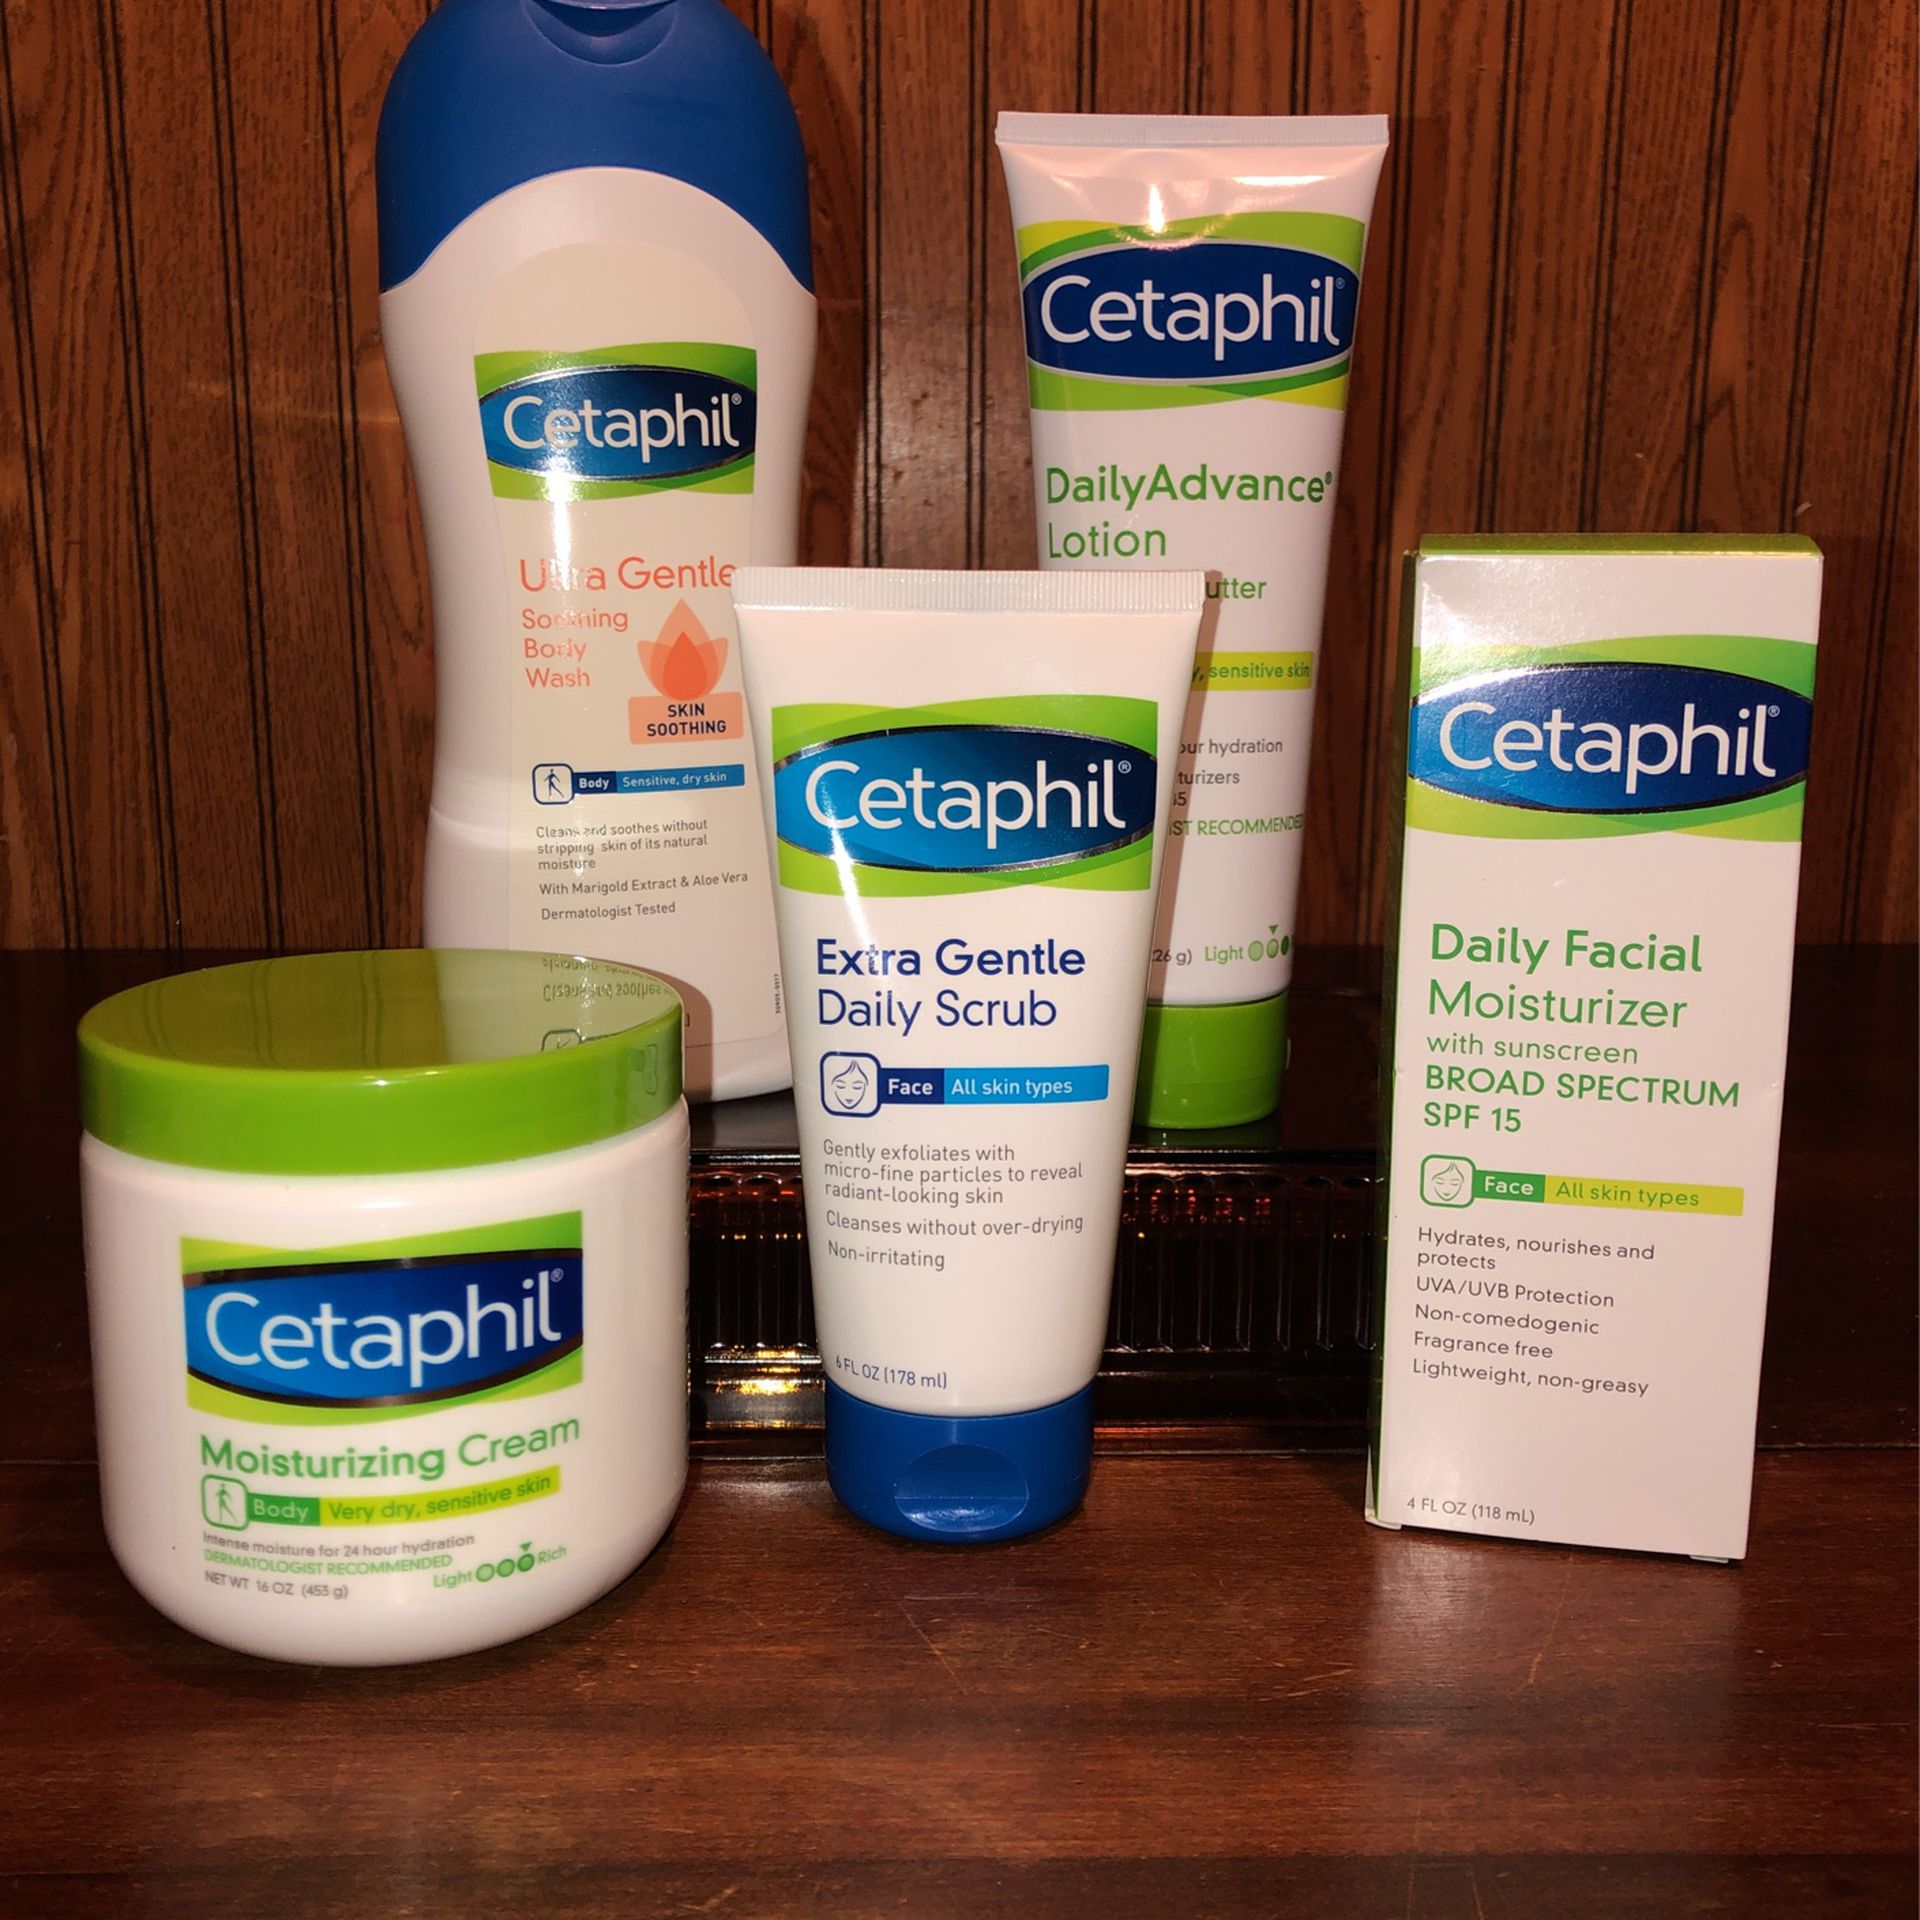 All Brand NEW! ✳️ Cetaphil brand Face & Body Care Products (((PENDING PICK UP TODAY 4-5pm)))